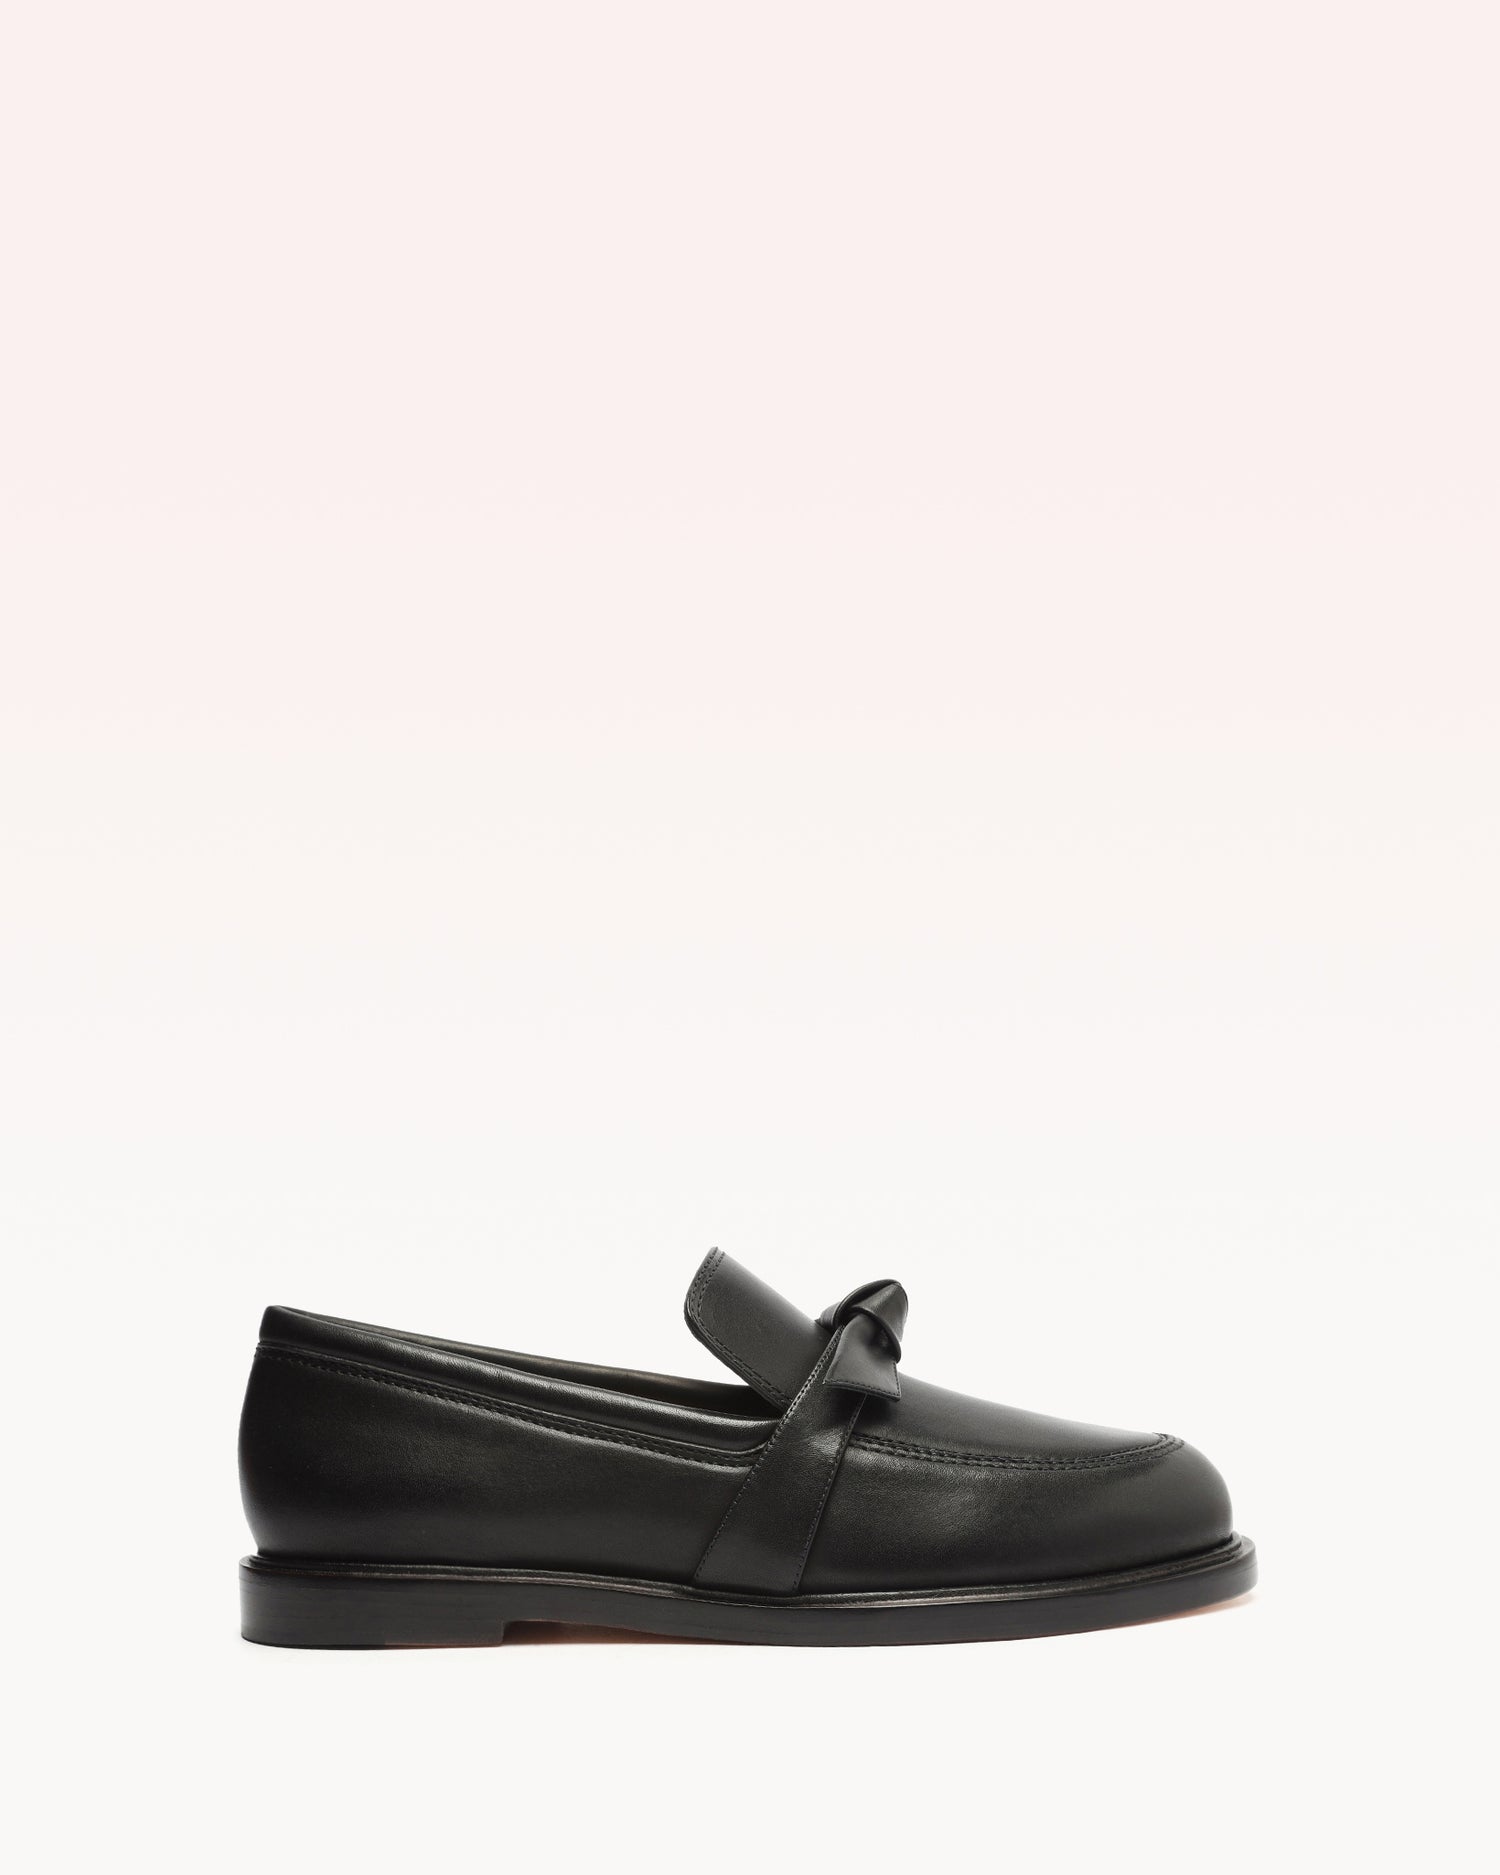 Clarita Chunky Loafer Black Loafers PRE FALL 23 35 Black Nappa Leather